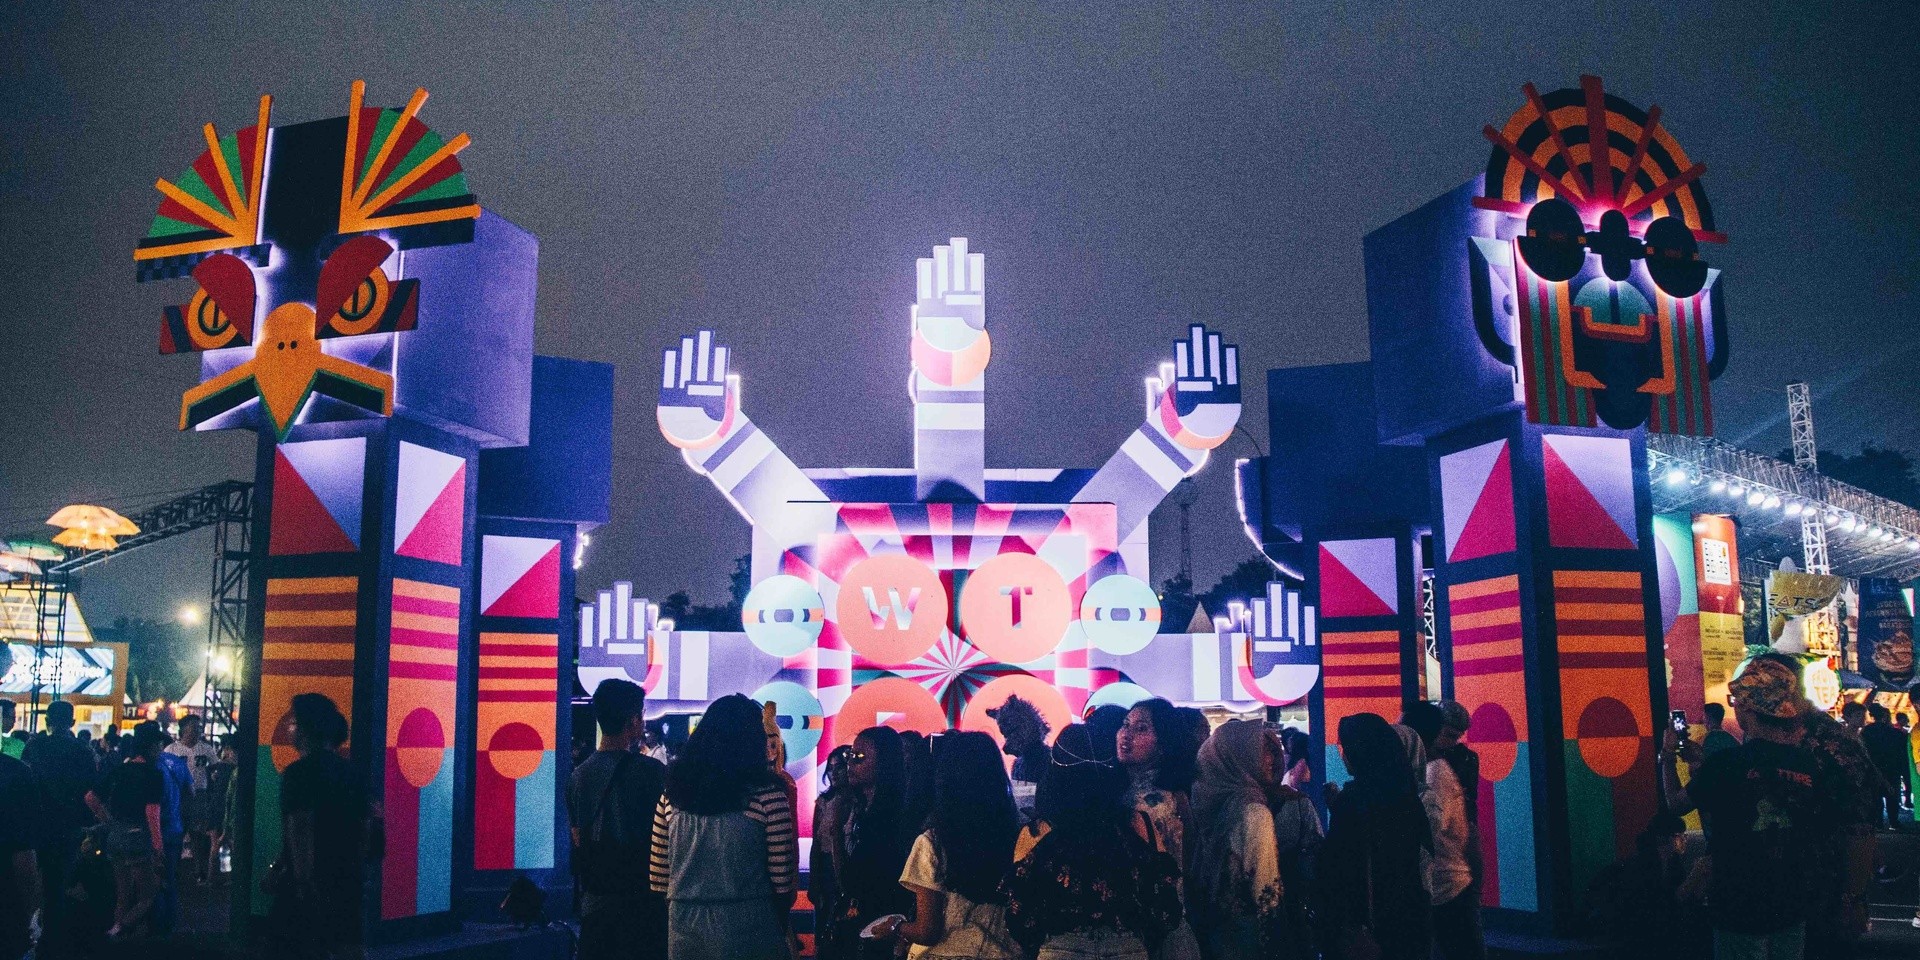 We The Fest 2018, as told by Filipino fans